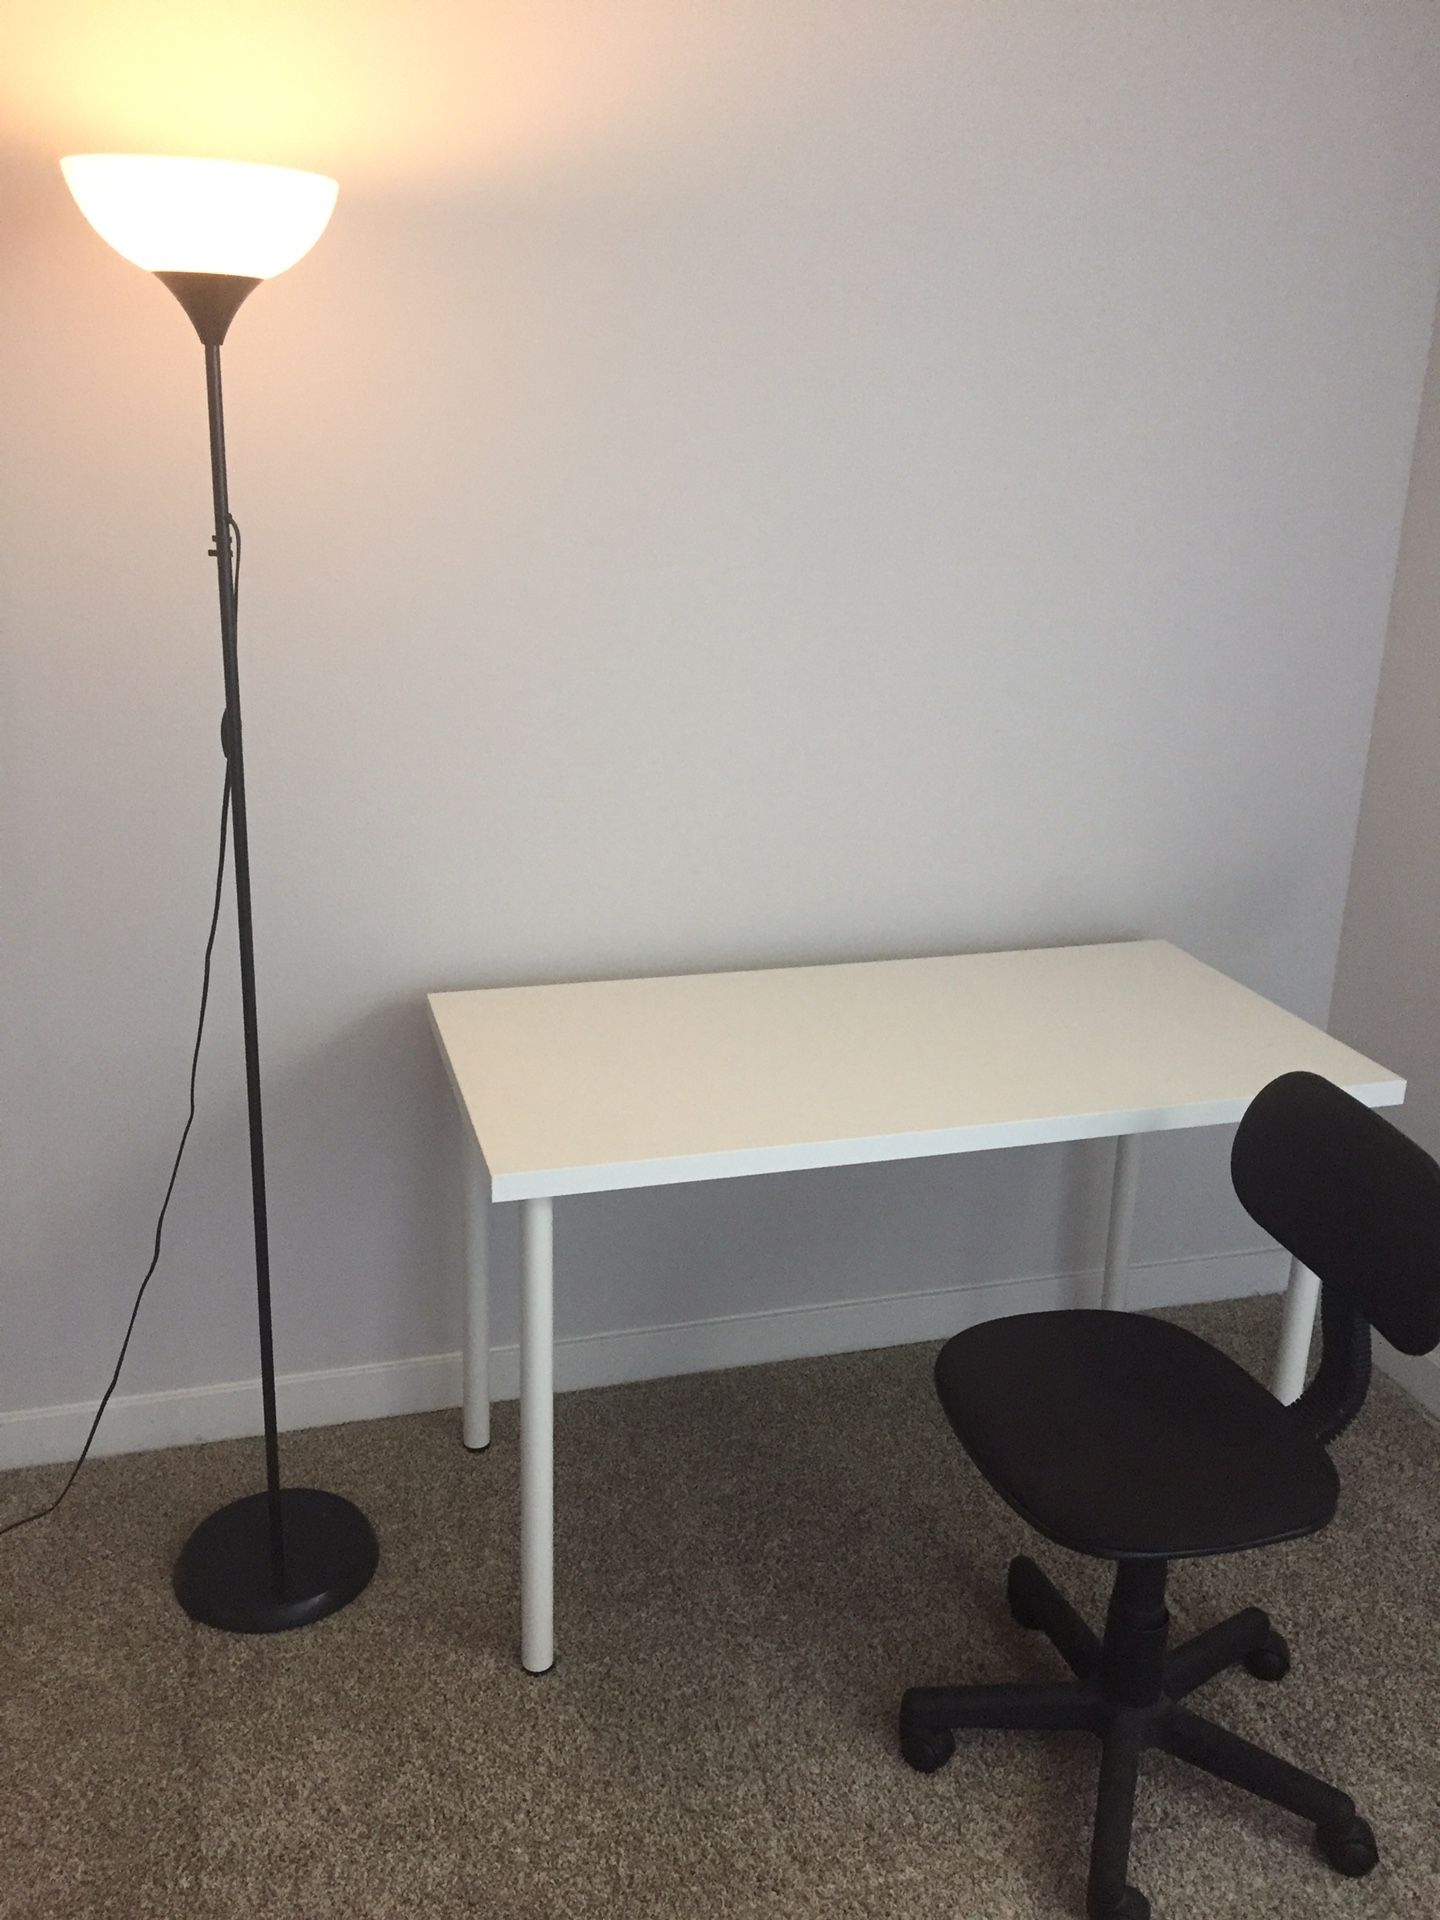 Move out sales! IKEA desk + chair + ikea lamp!